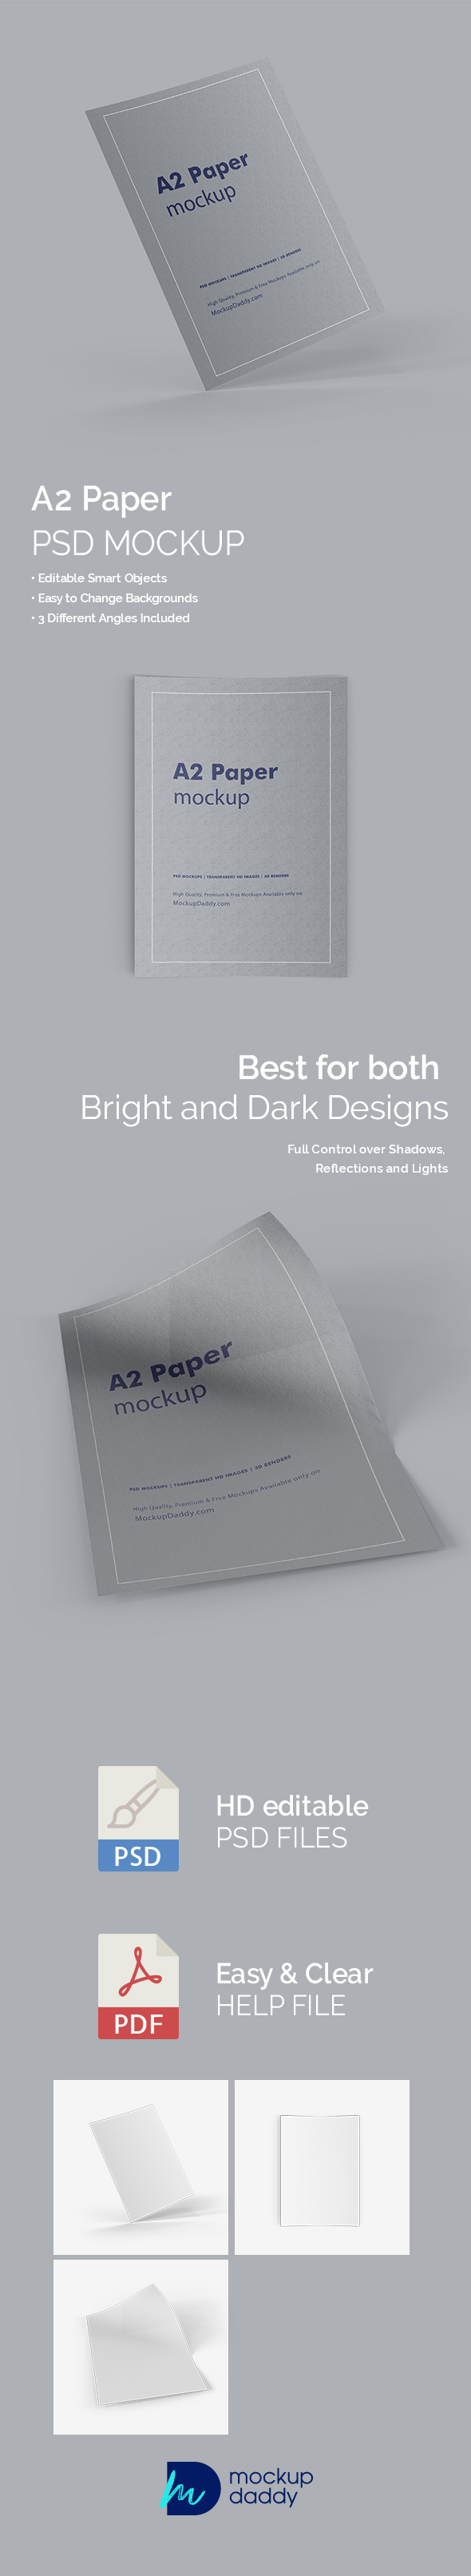 A2 Paper Mockup Featured